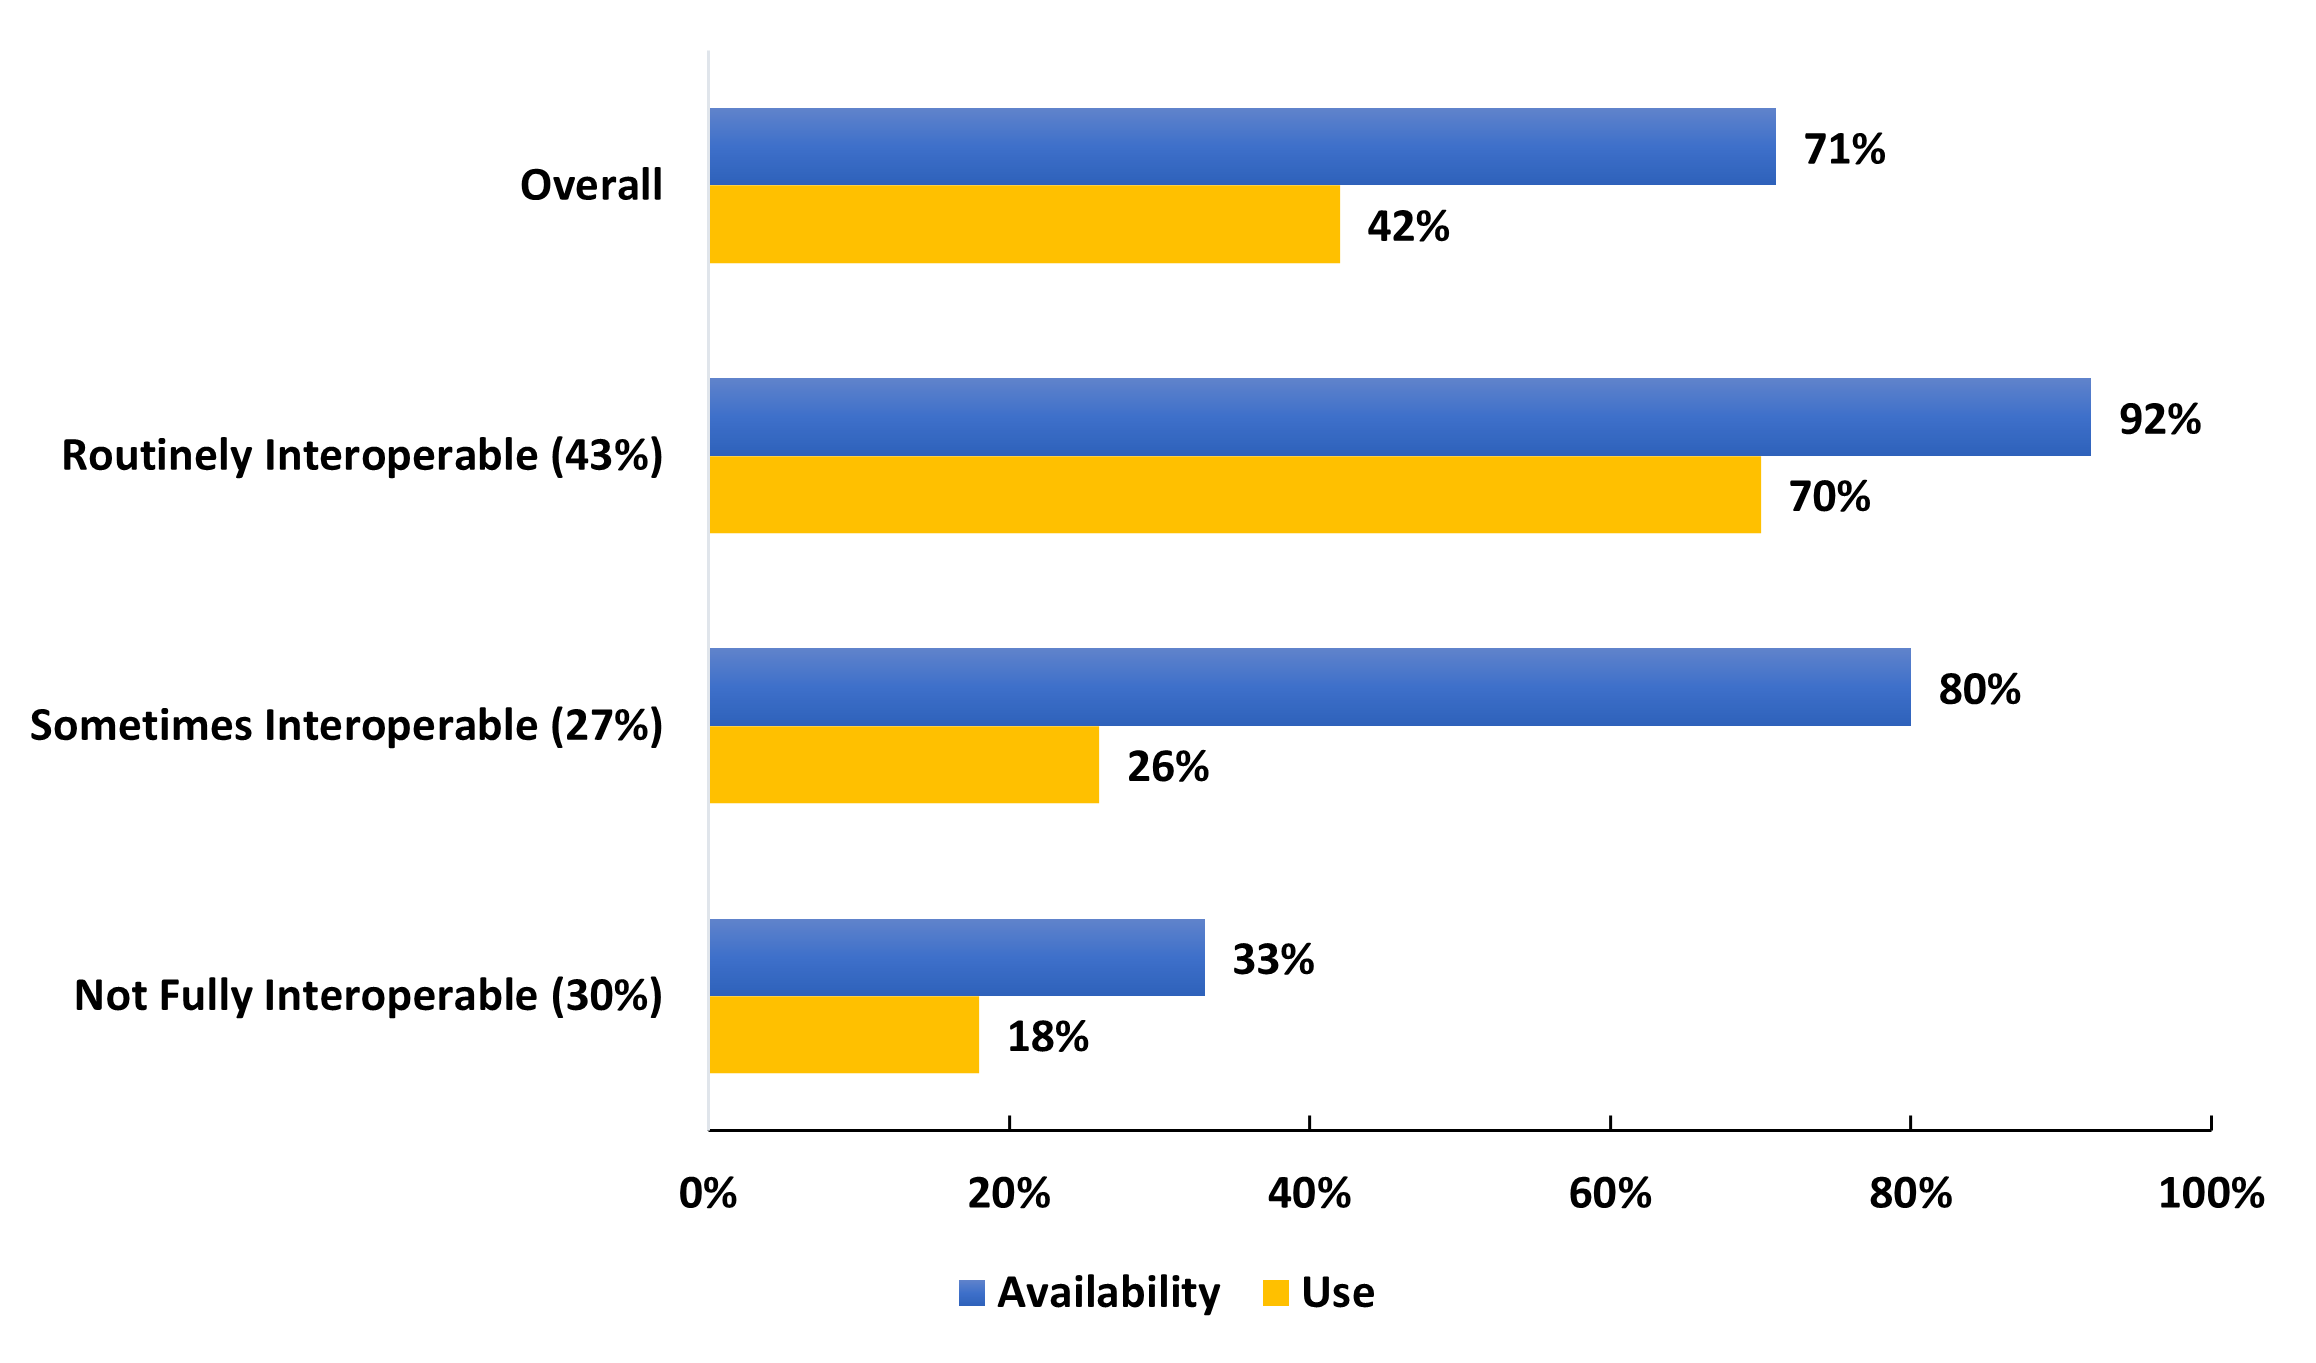 This figure has combined bar charts displaying the availability and use of electronic patient health information from external providers at the point of care in non-federal acute care hospitals in 2023. The first chart shows that 71% of hospitals reported having the necessary clinical information electronically available at the point of care. The second chart details clinician usage of this information, with 42% of clinicians routinely using it in patient care, 26% sometimes using it, and 32% rarely or never using it. The charts highlight the difference between the availability of electronic health information and its practical use by clinicians in treating patients, with a considerable percentage still underutilizing available resources.